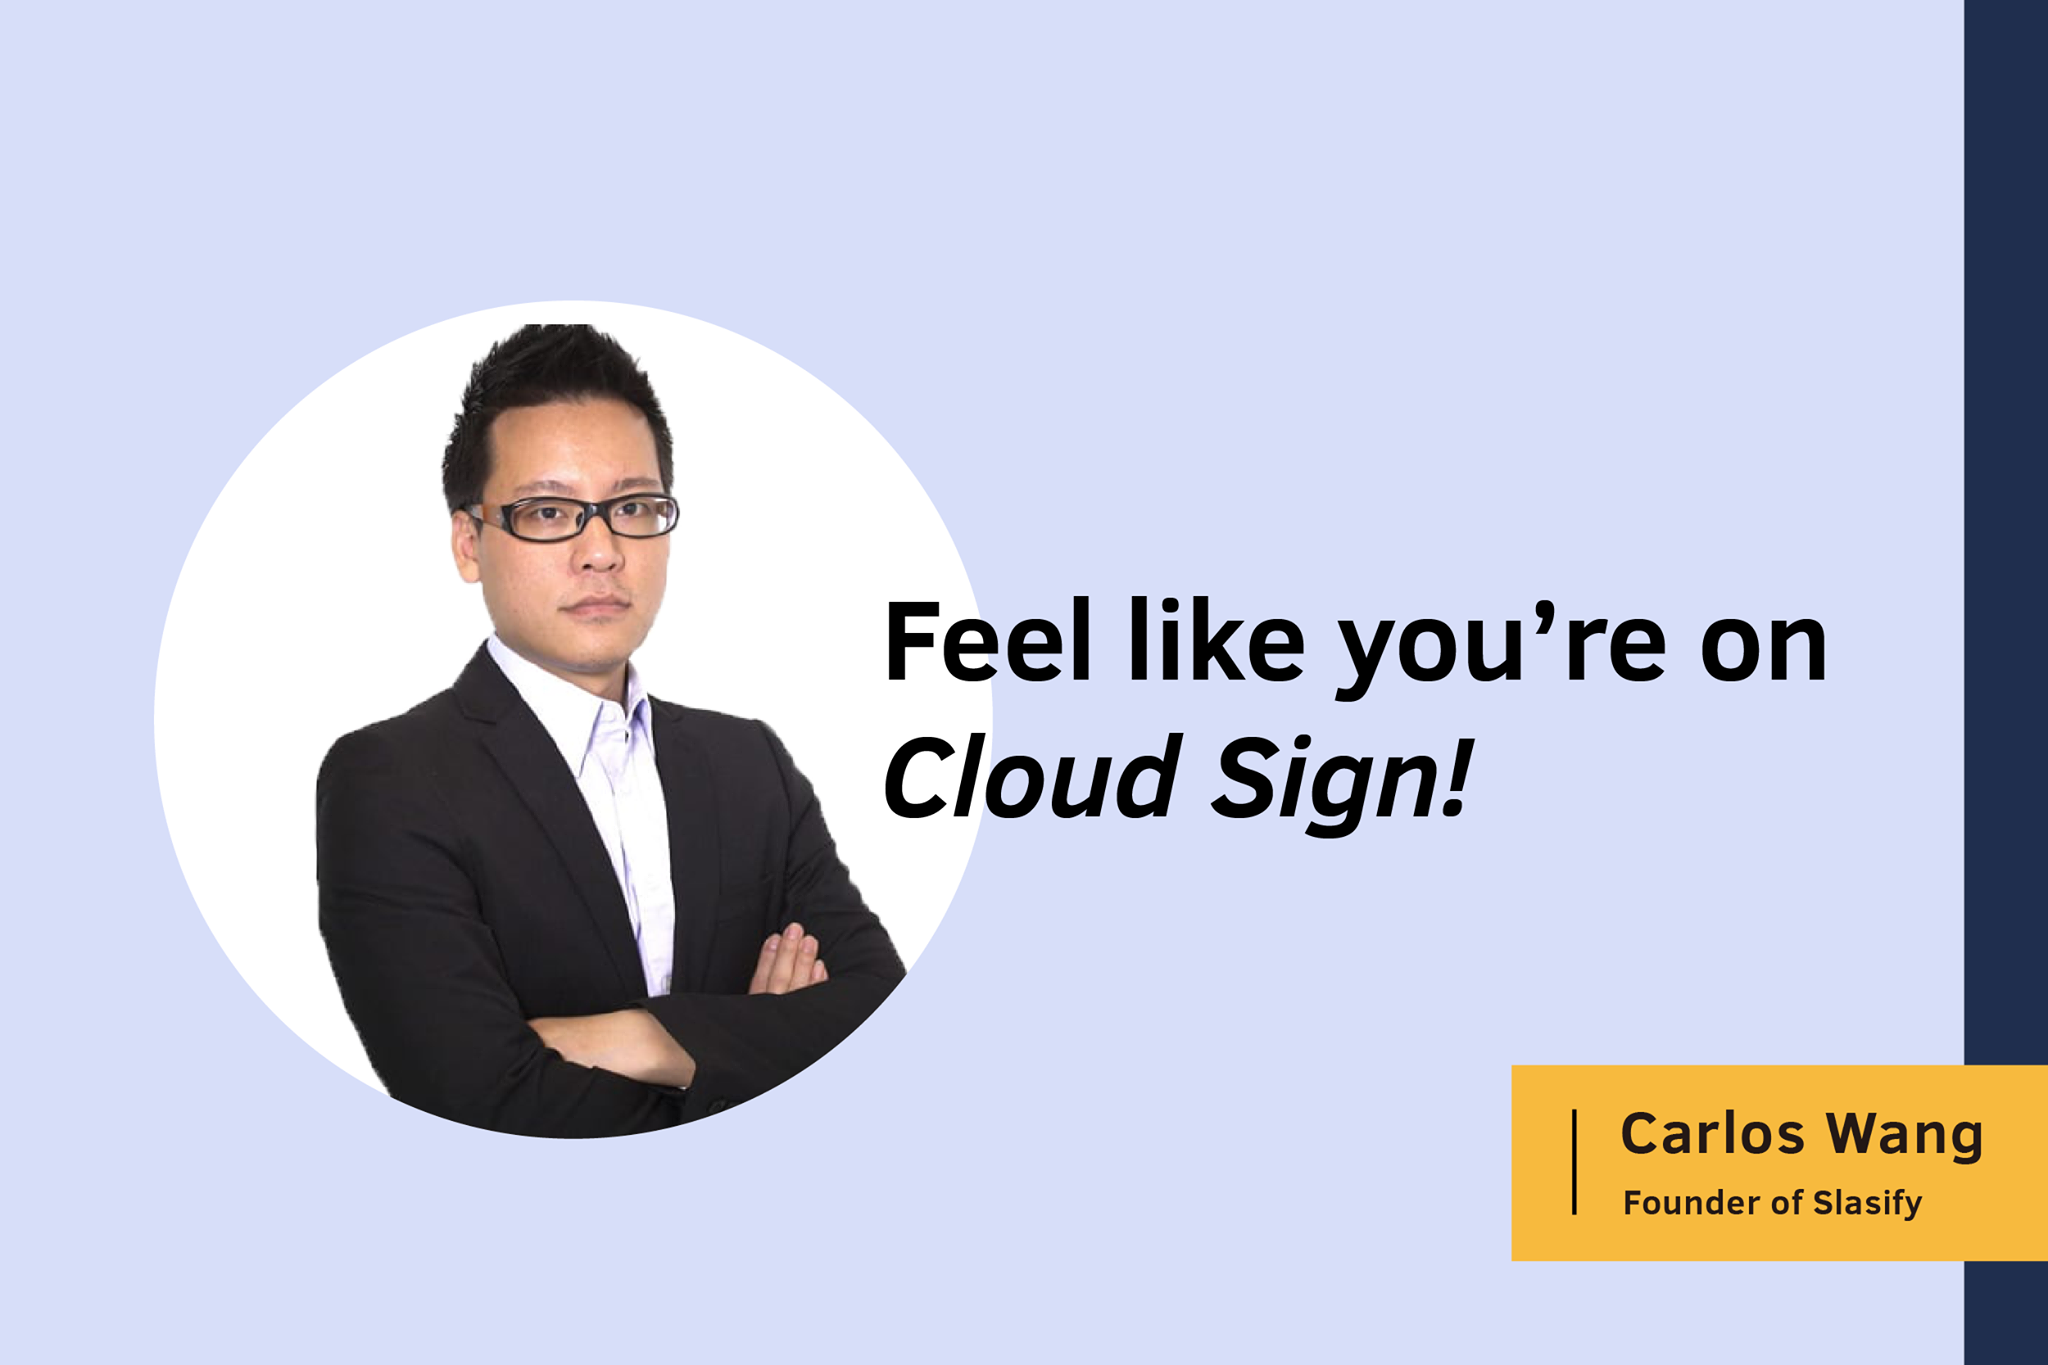 E-Signature Made Easier and Faster: Slasify x DottedSign